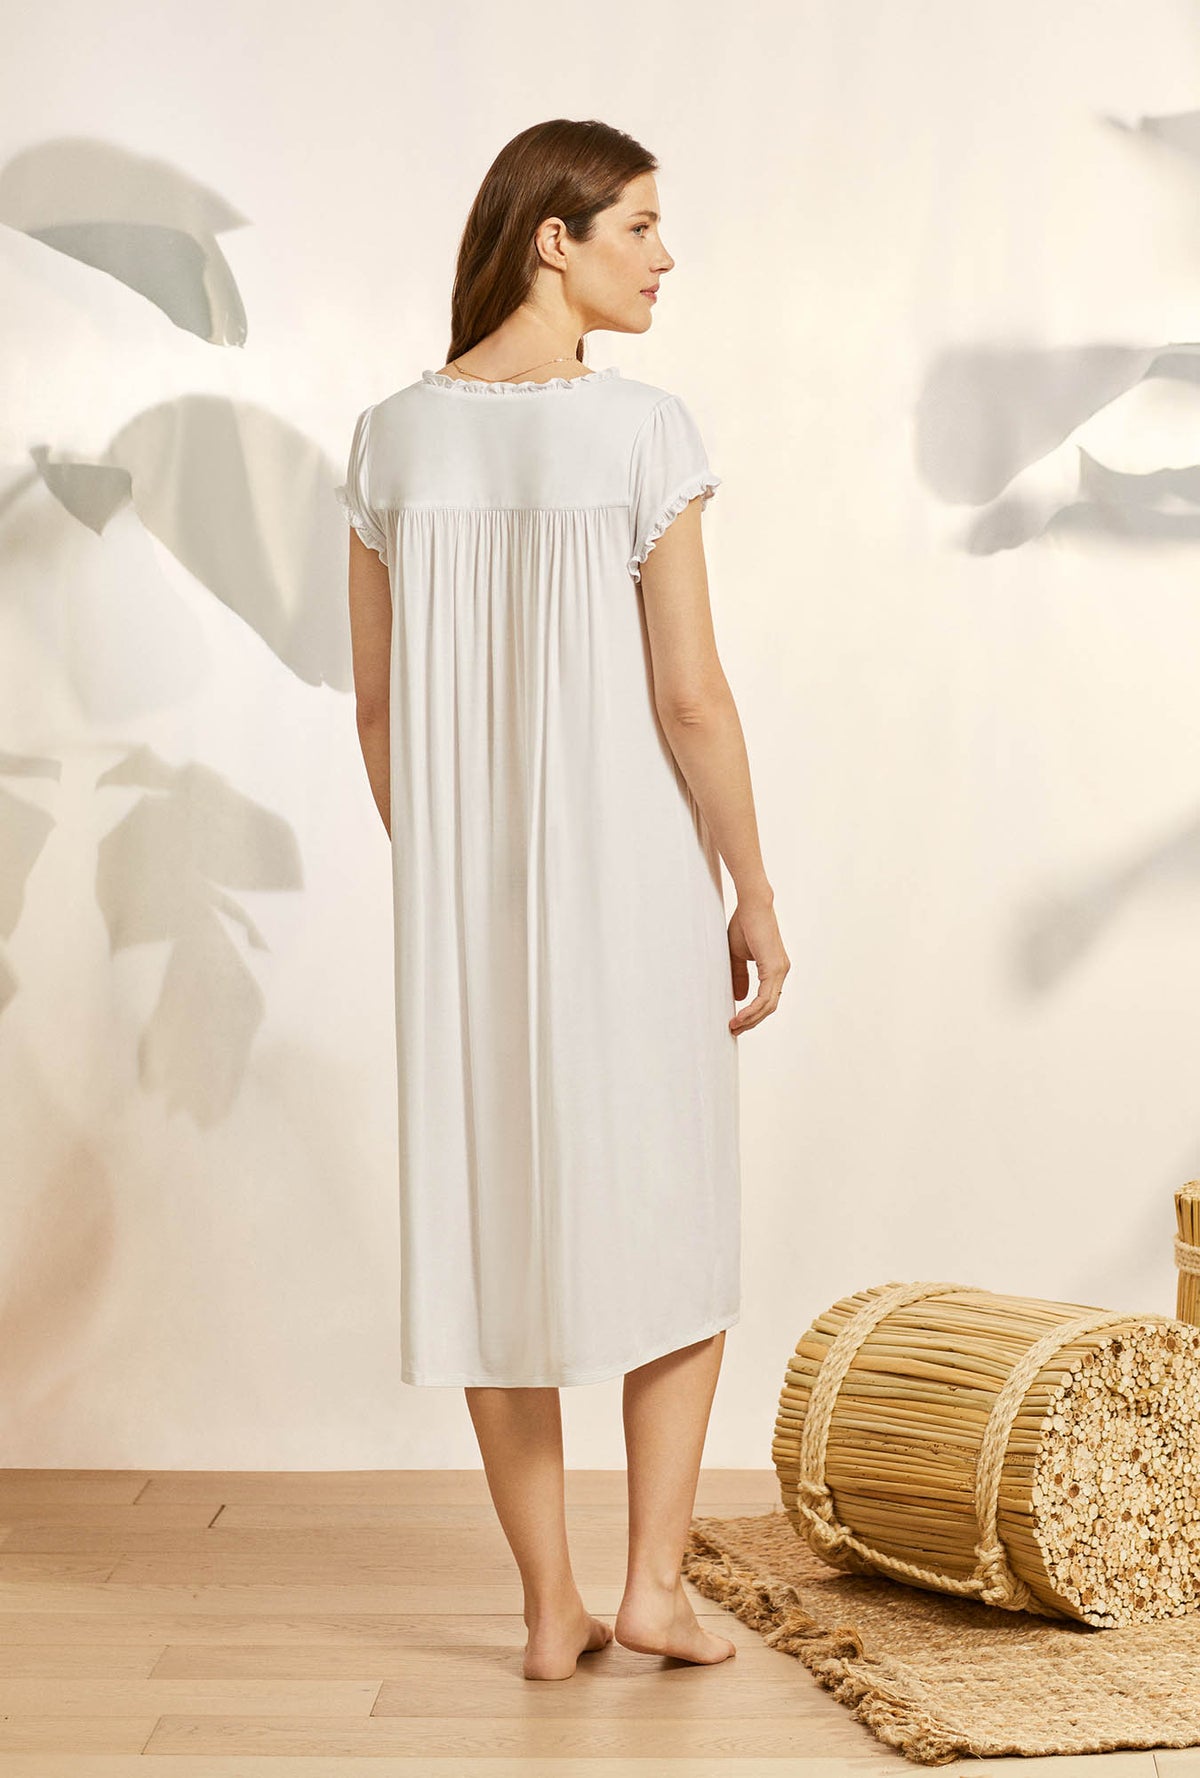 A lady wearing white cap sleeve cassic knit waltz nightgown with tencel white dream pattern